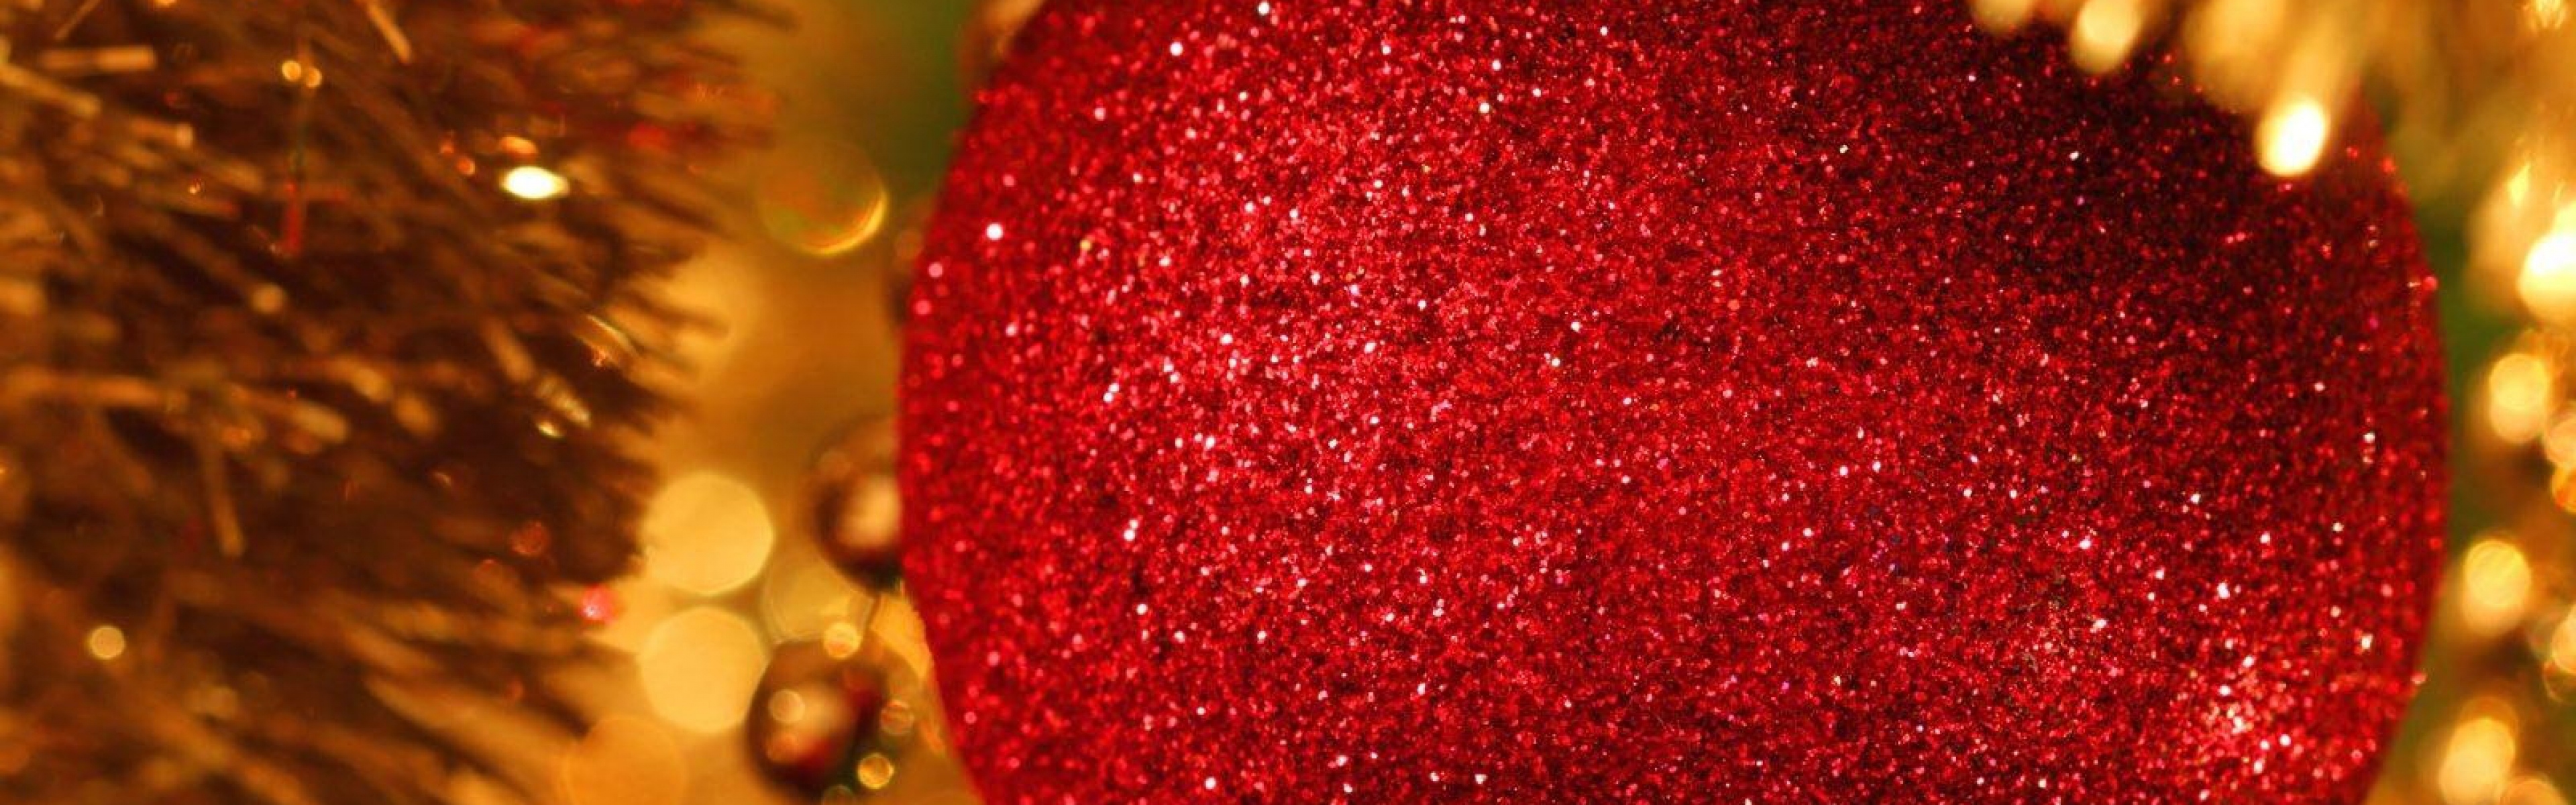 Download Wallpaper 3840x1200 Christmas decorations, Tinsel, New